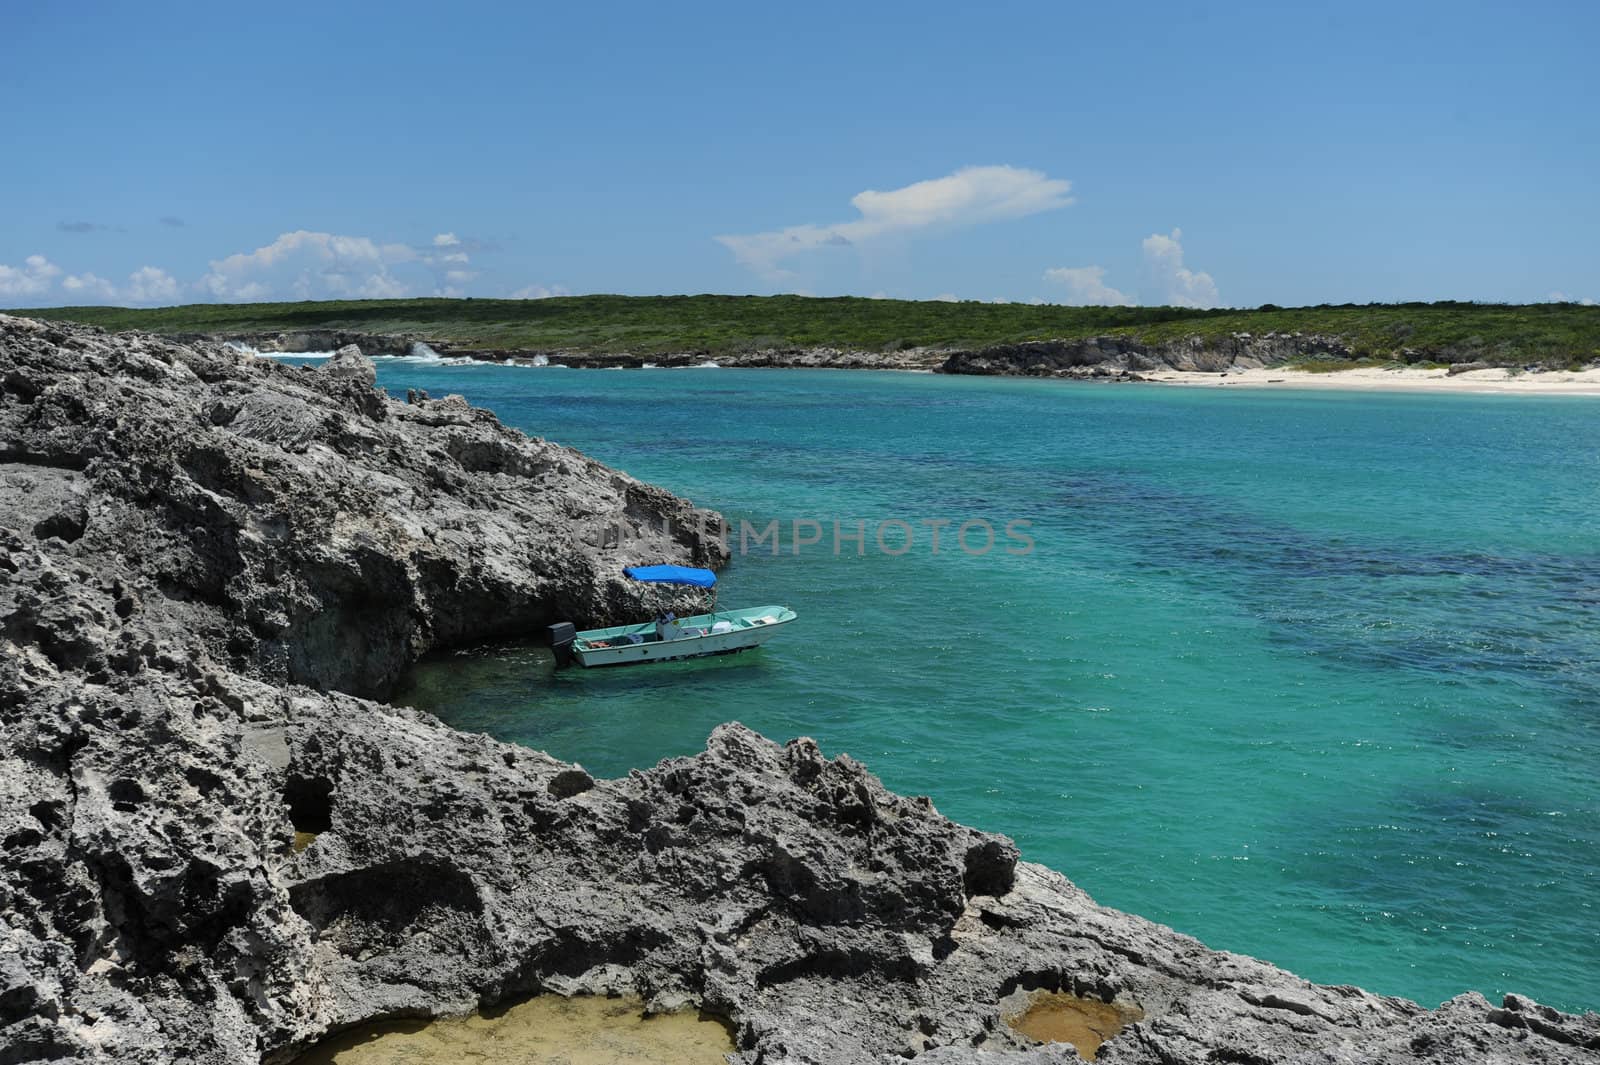 Small boat in tropical setting anchored near rocky island in the Caribbean